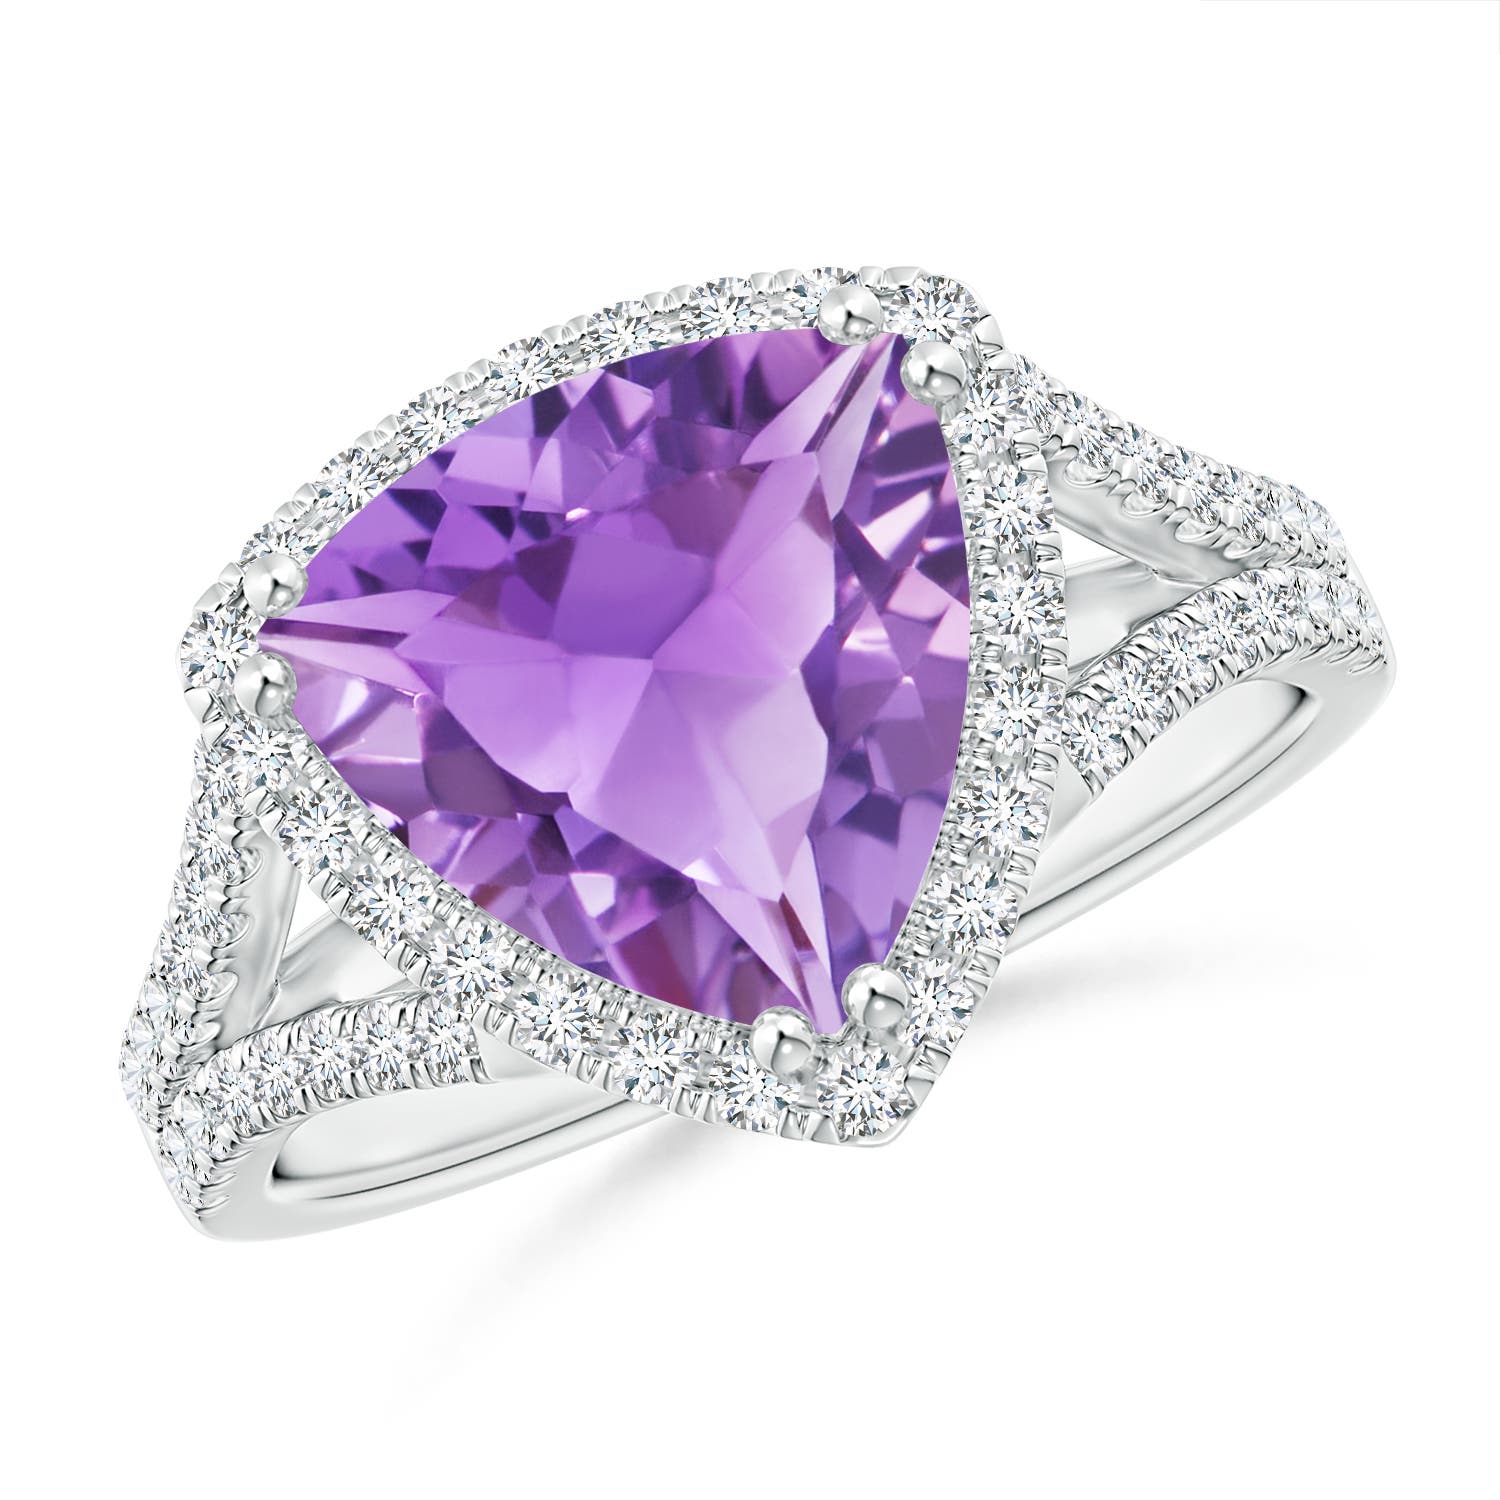 A - Amethyst / 3.16 CT / 14 KT White Gold